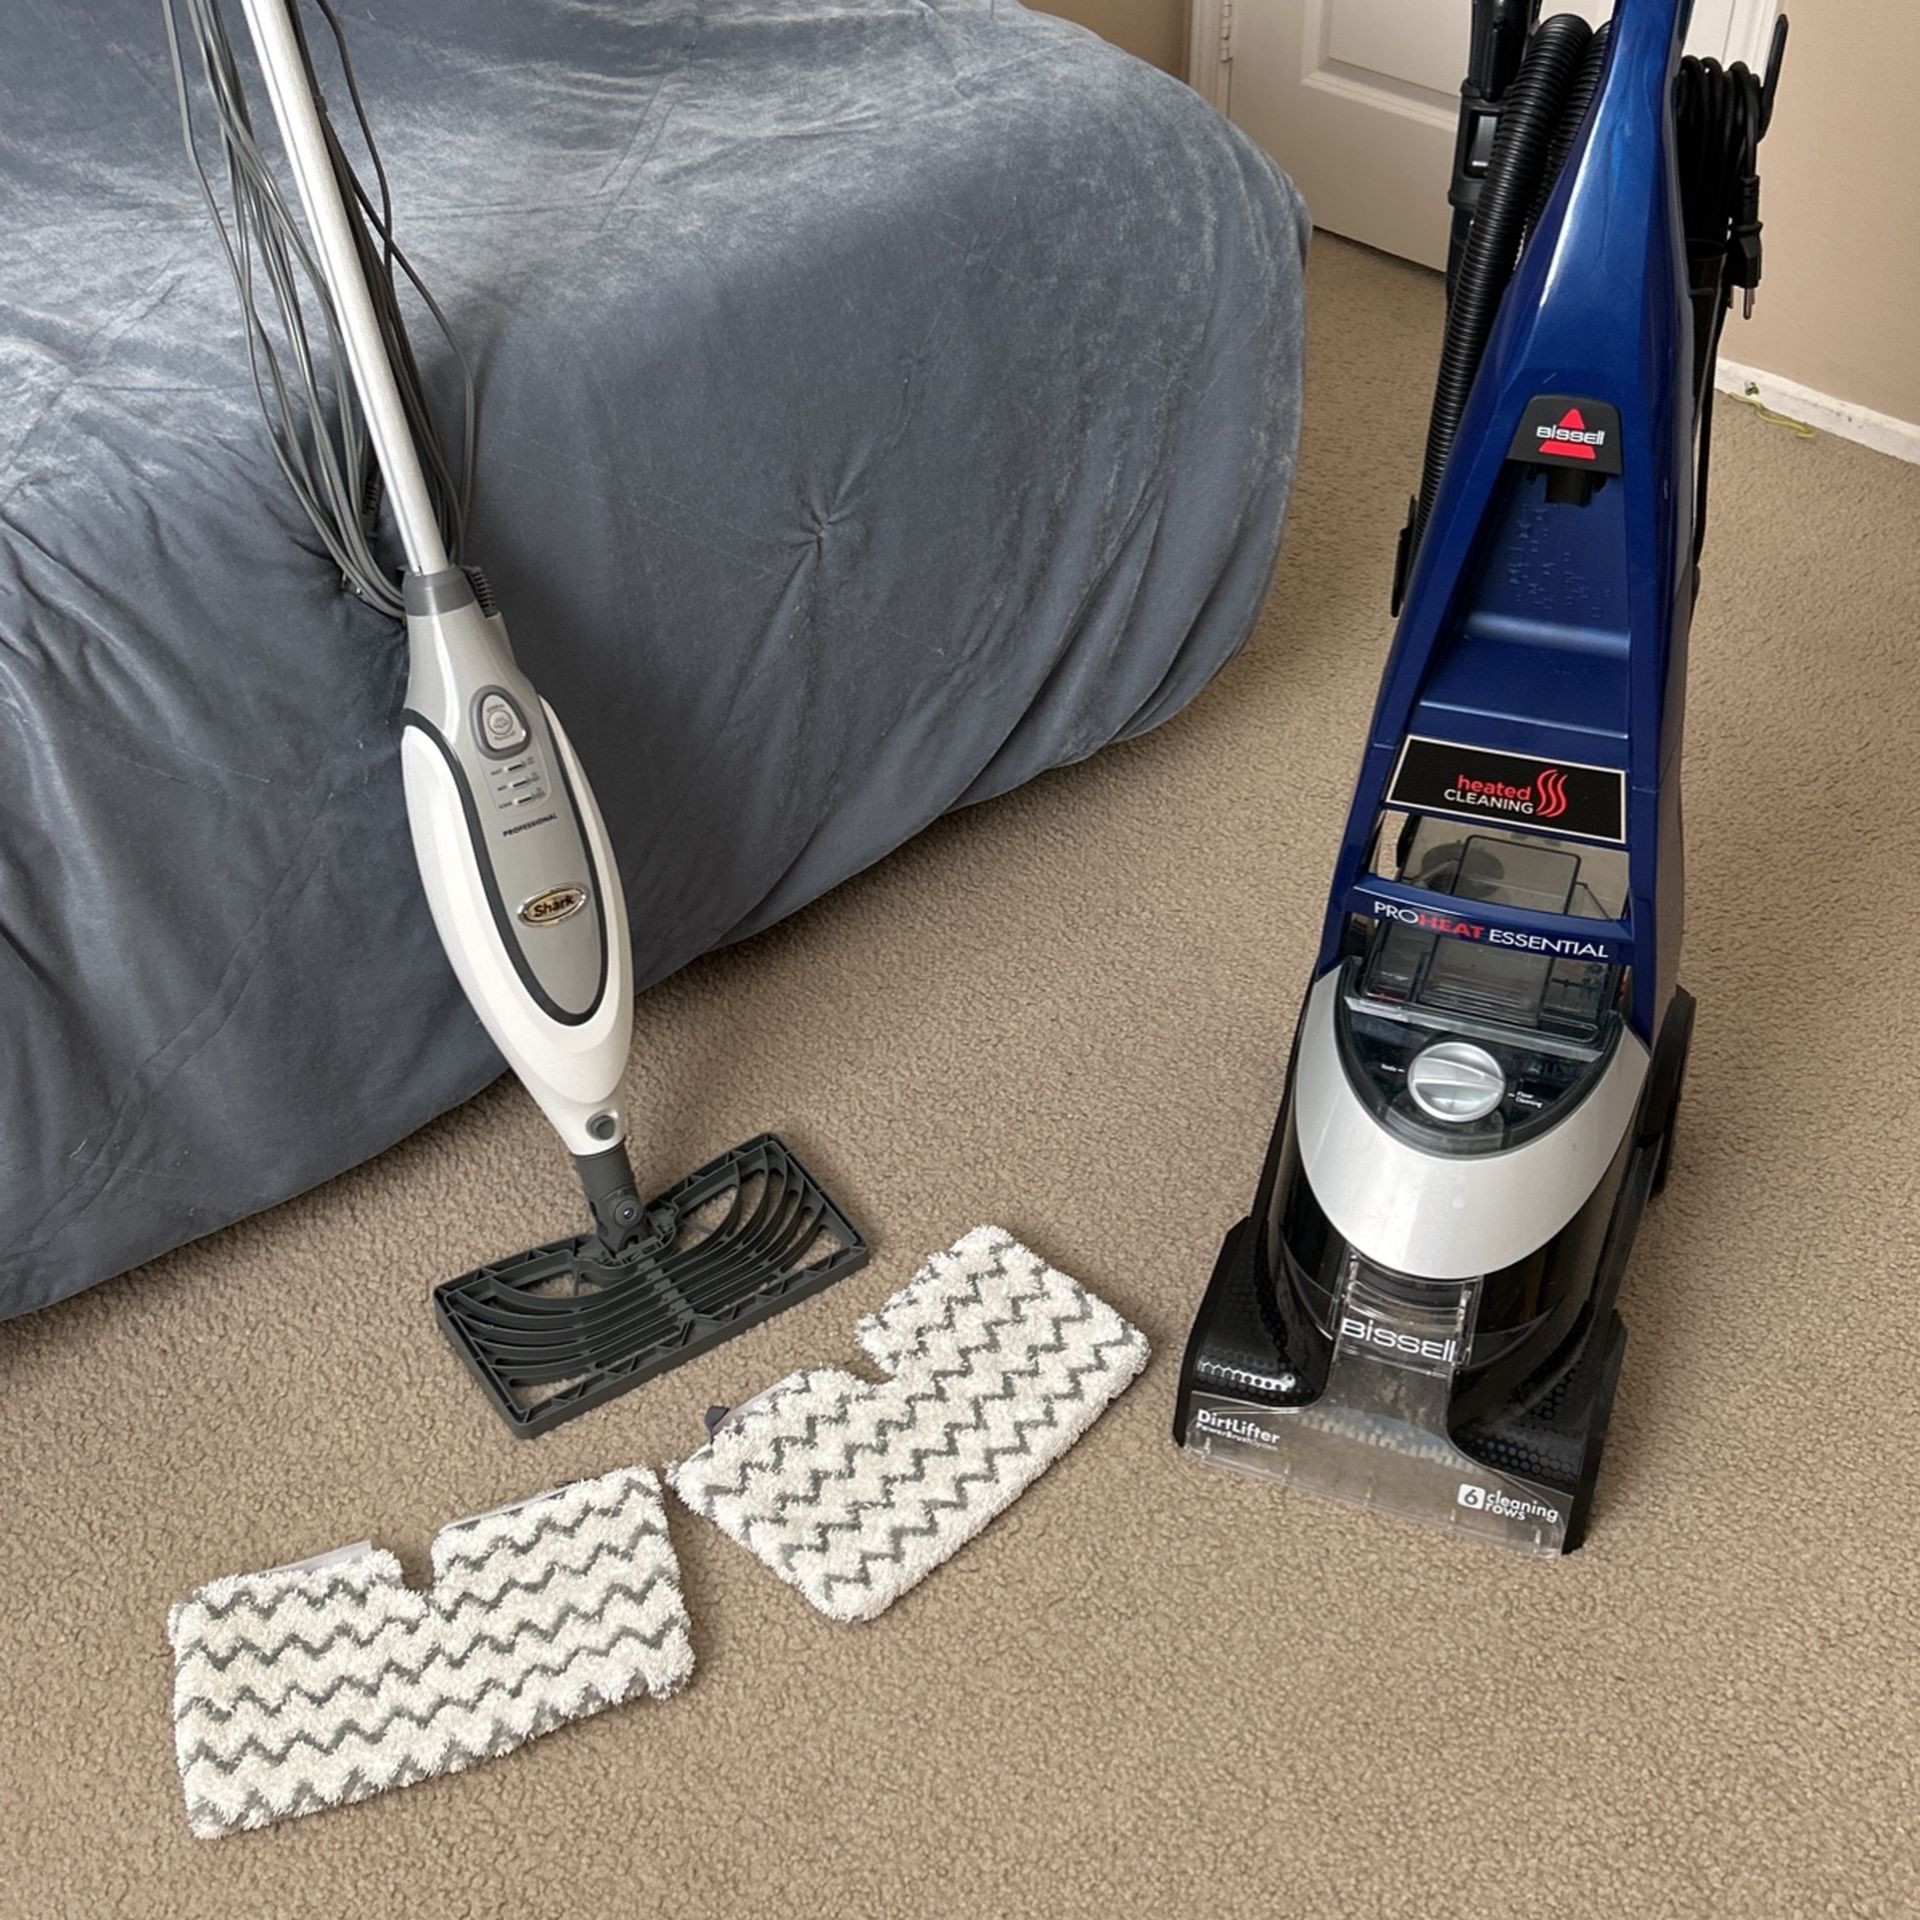 Bissell Proheat Carpet Cleaner And Shark Steam Mop